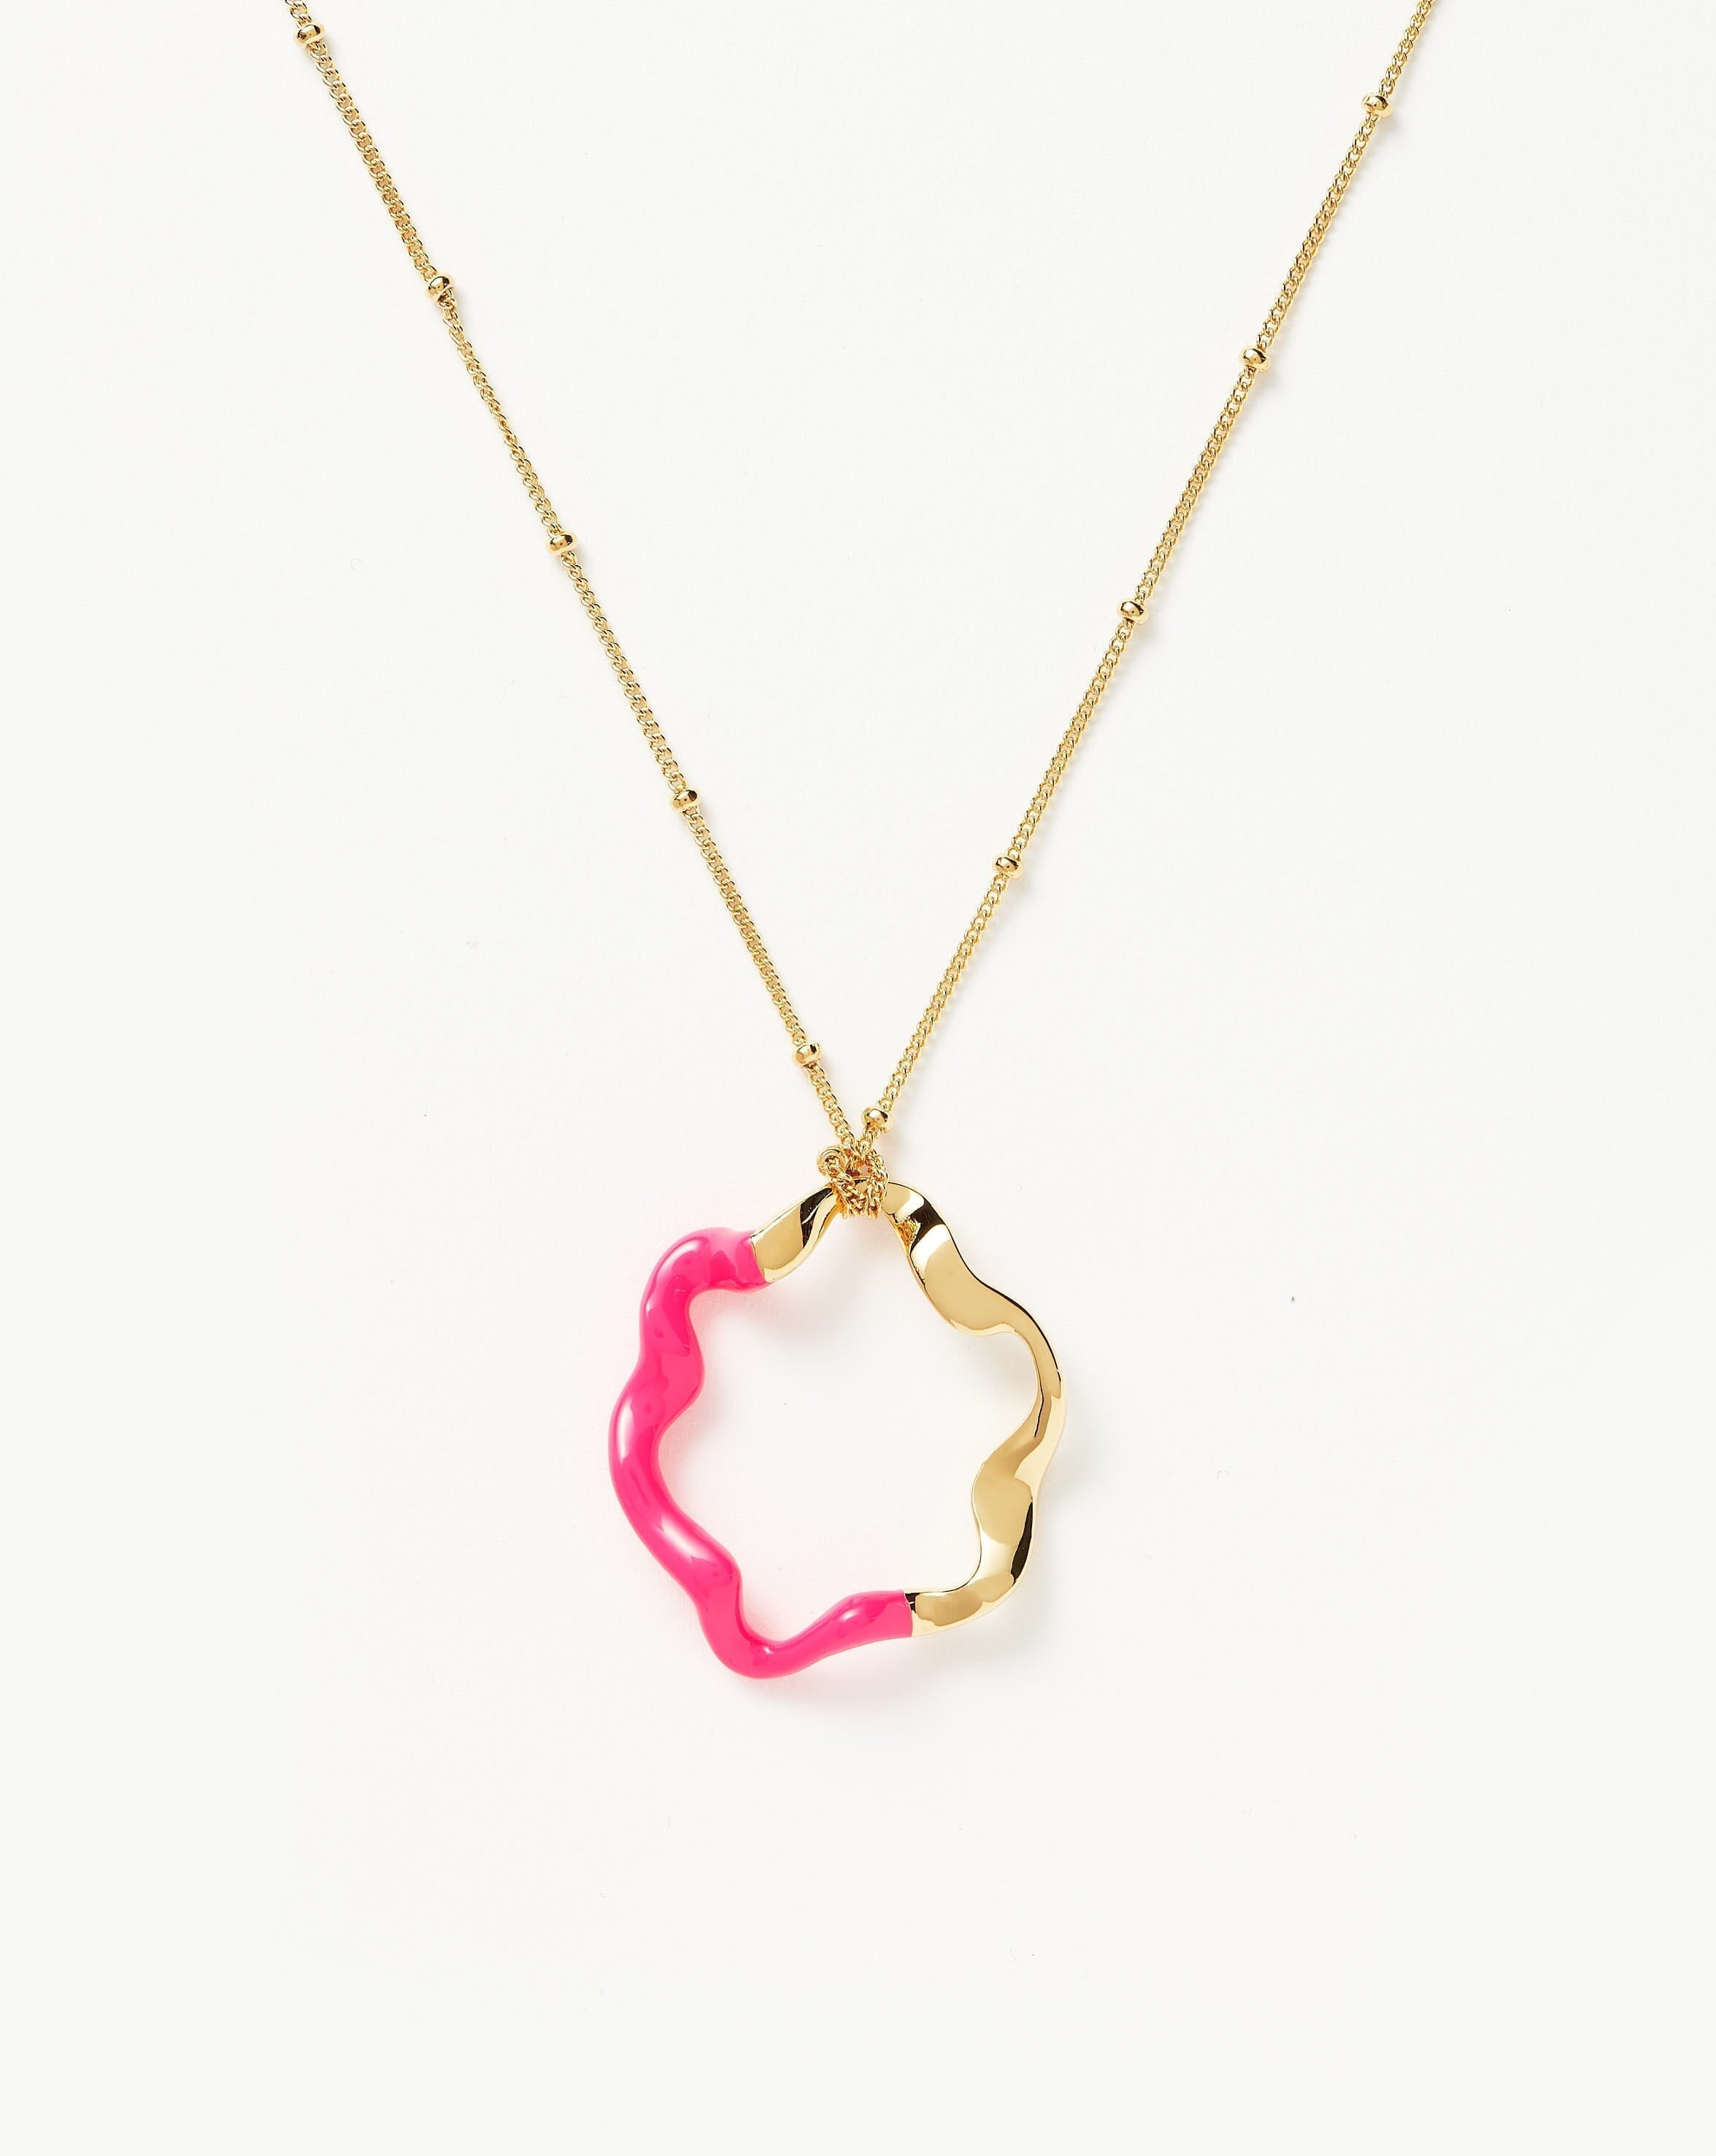 Neon Yellow Heart necklace